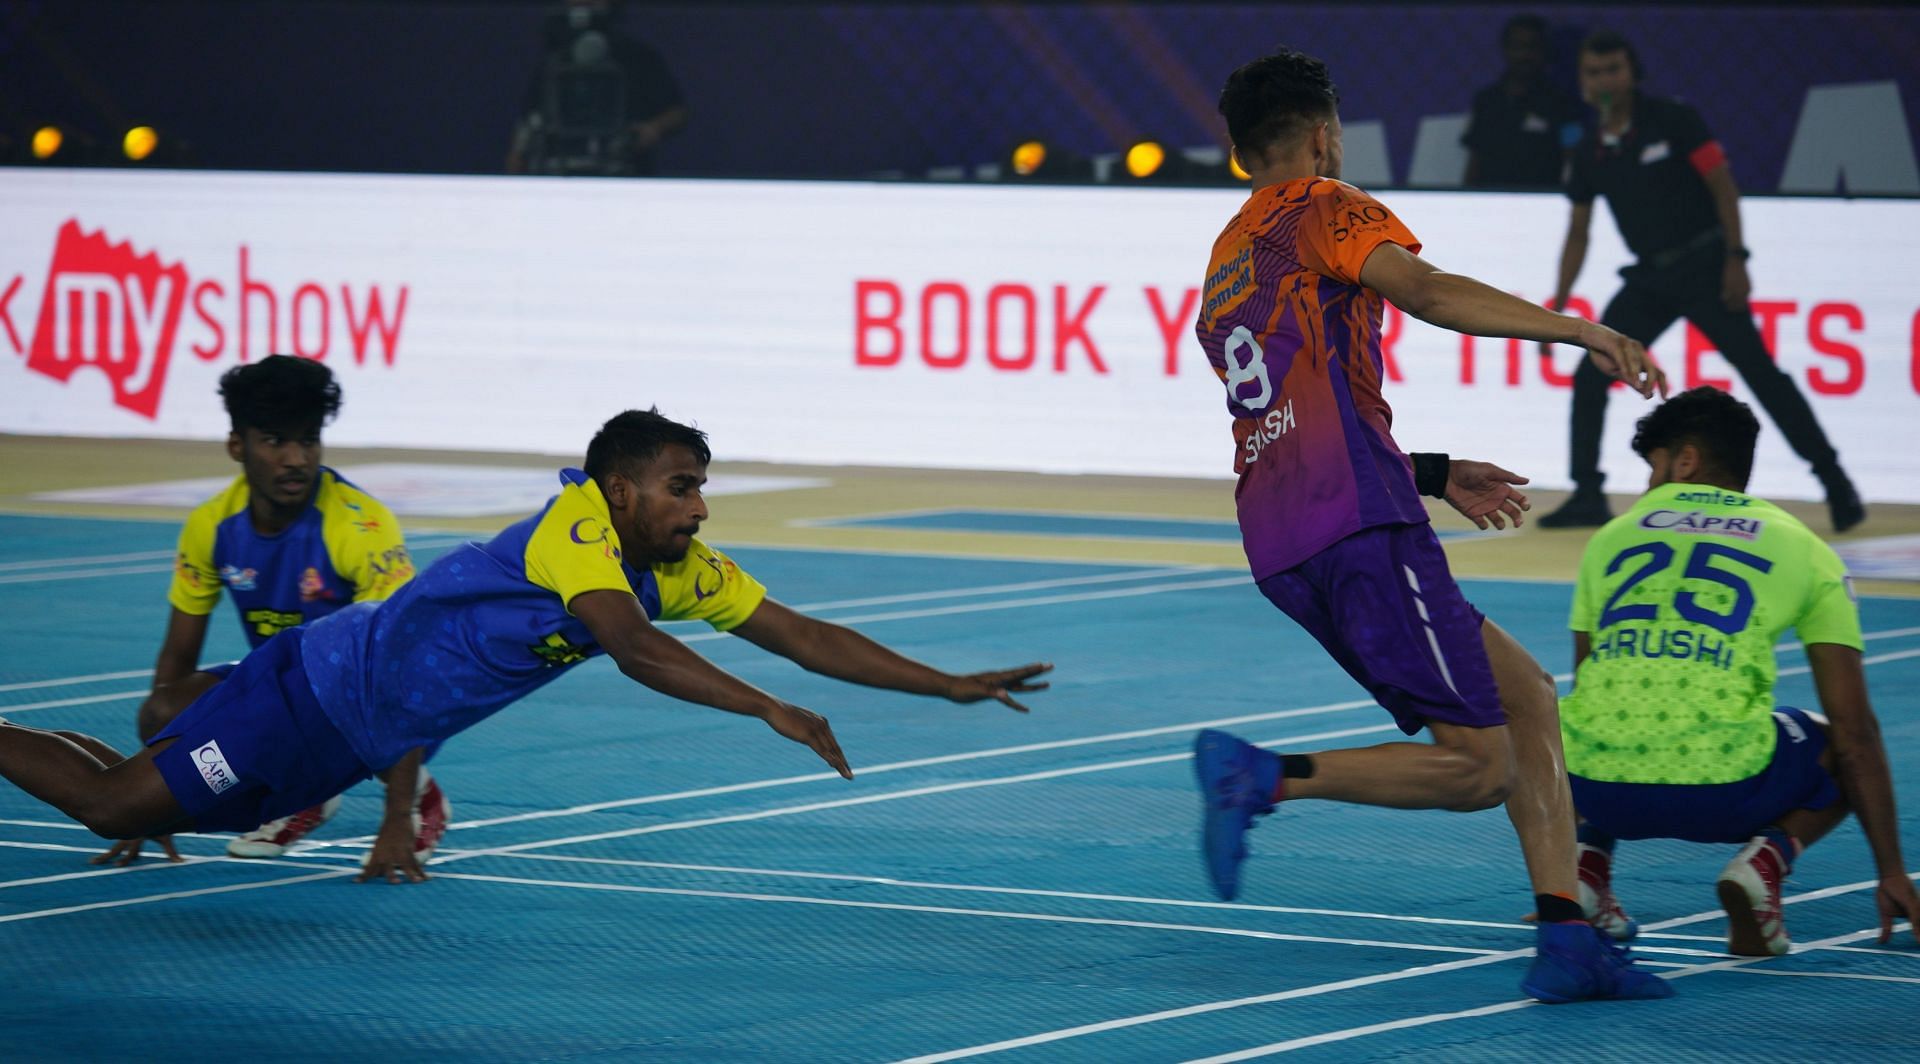 Abhijit Patil (second from left) puts in a sky dive during an Ultimate Kho Kho 2022 match.